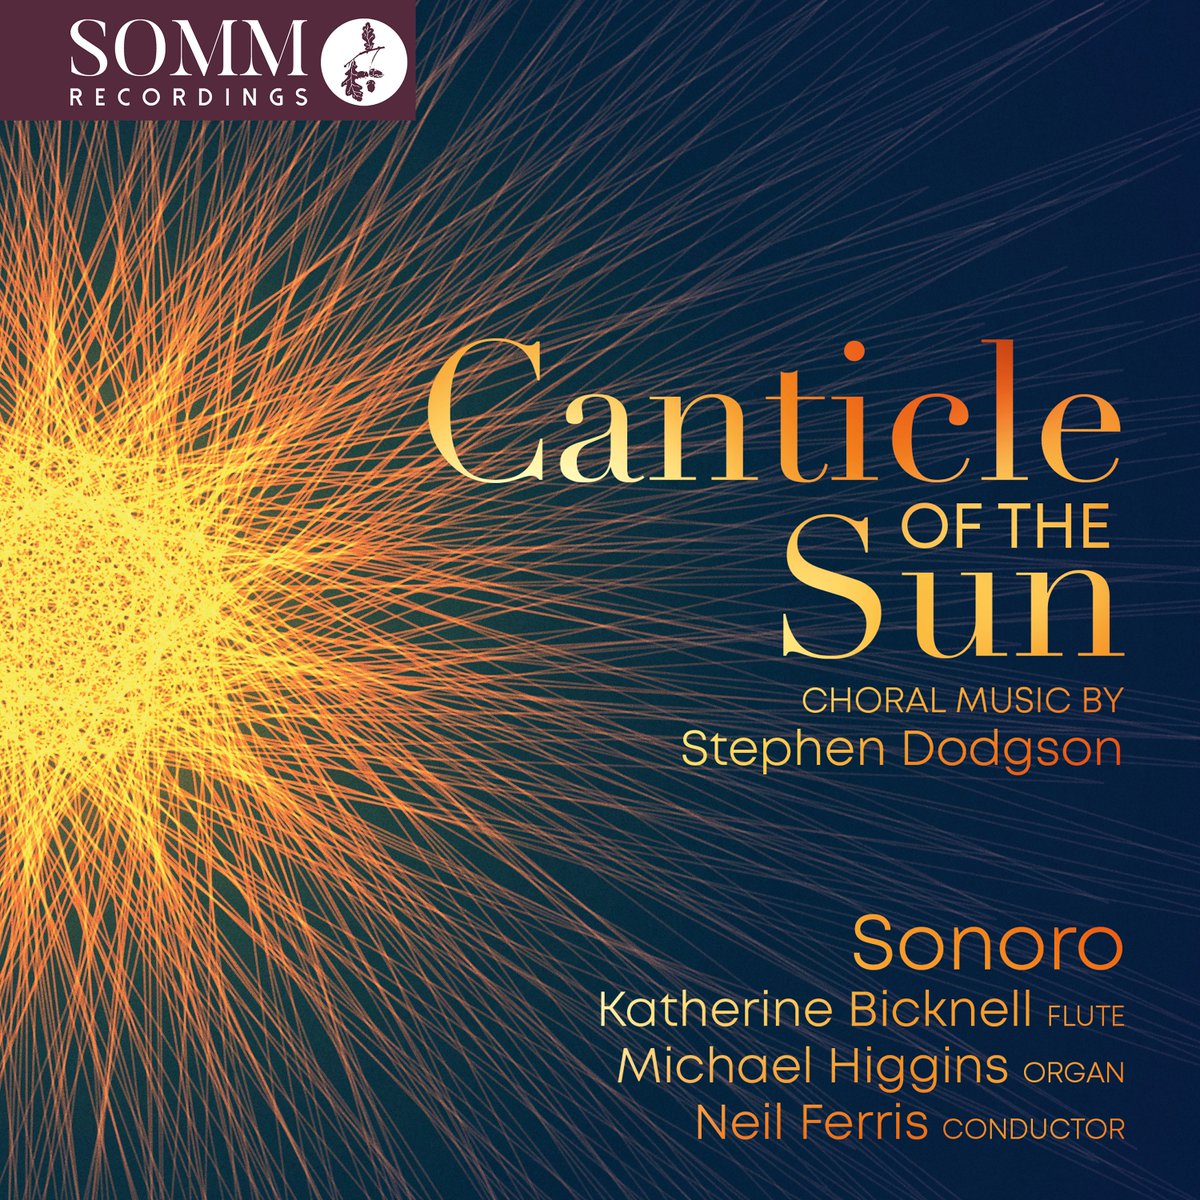 SOMM Recordings announces the 17 May release of “Canticle of the Sun”, an album dedicated to choral works by Stephen Dodgson and featuring @sonorochoir, Katherine Bicknell, @mrhigginsmusic, and @neilcpferris. Avaialble for pre-order now at somm-recordings.com/?p=16283